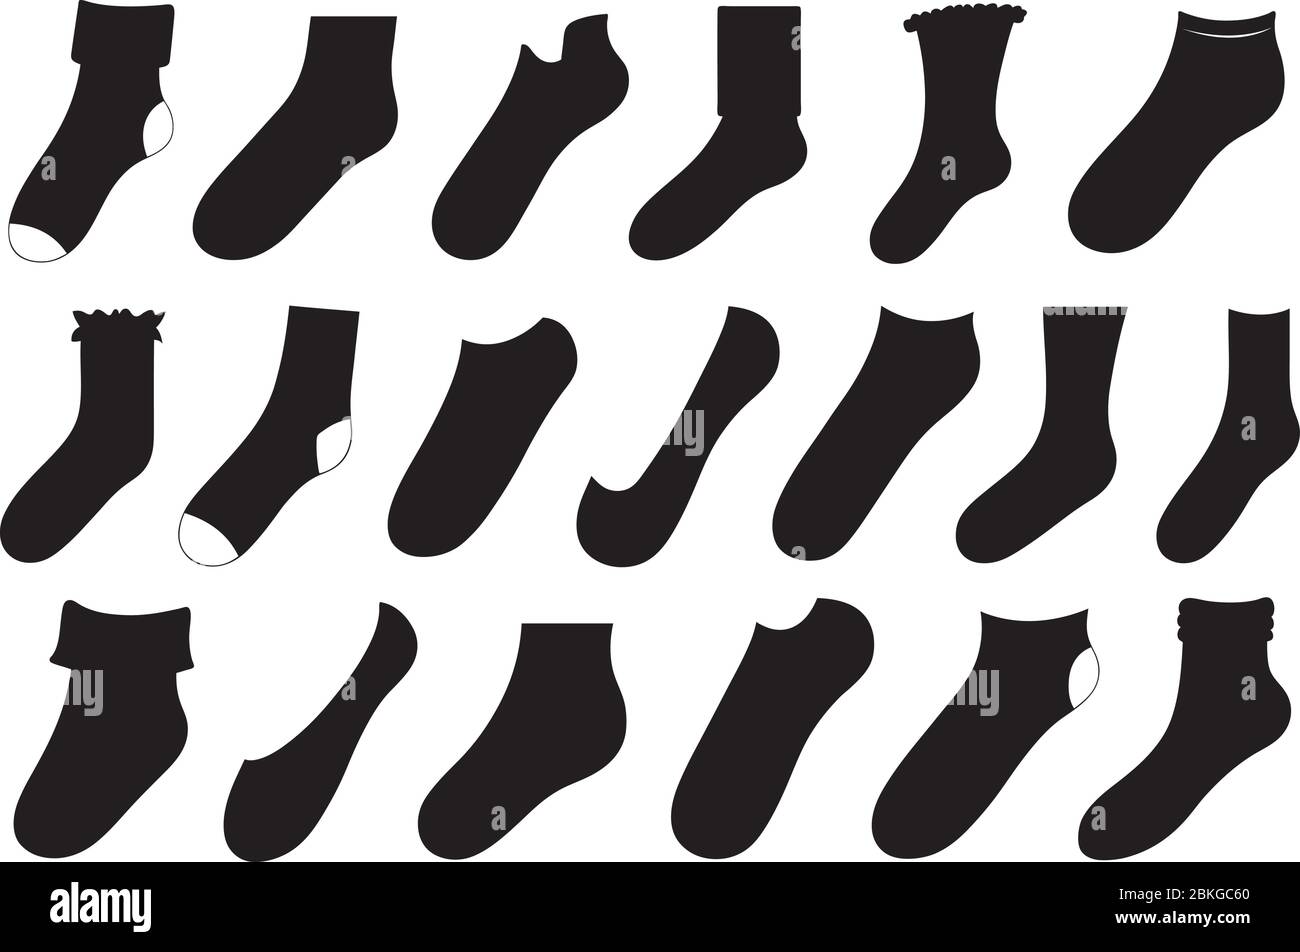 Set of different socks isolated on white Stock Vector